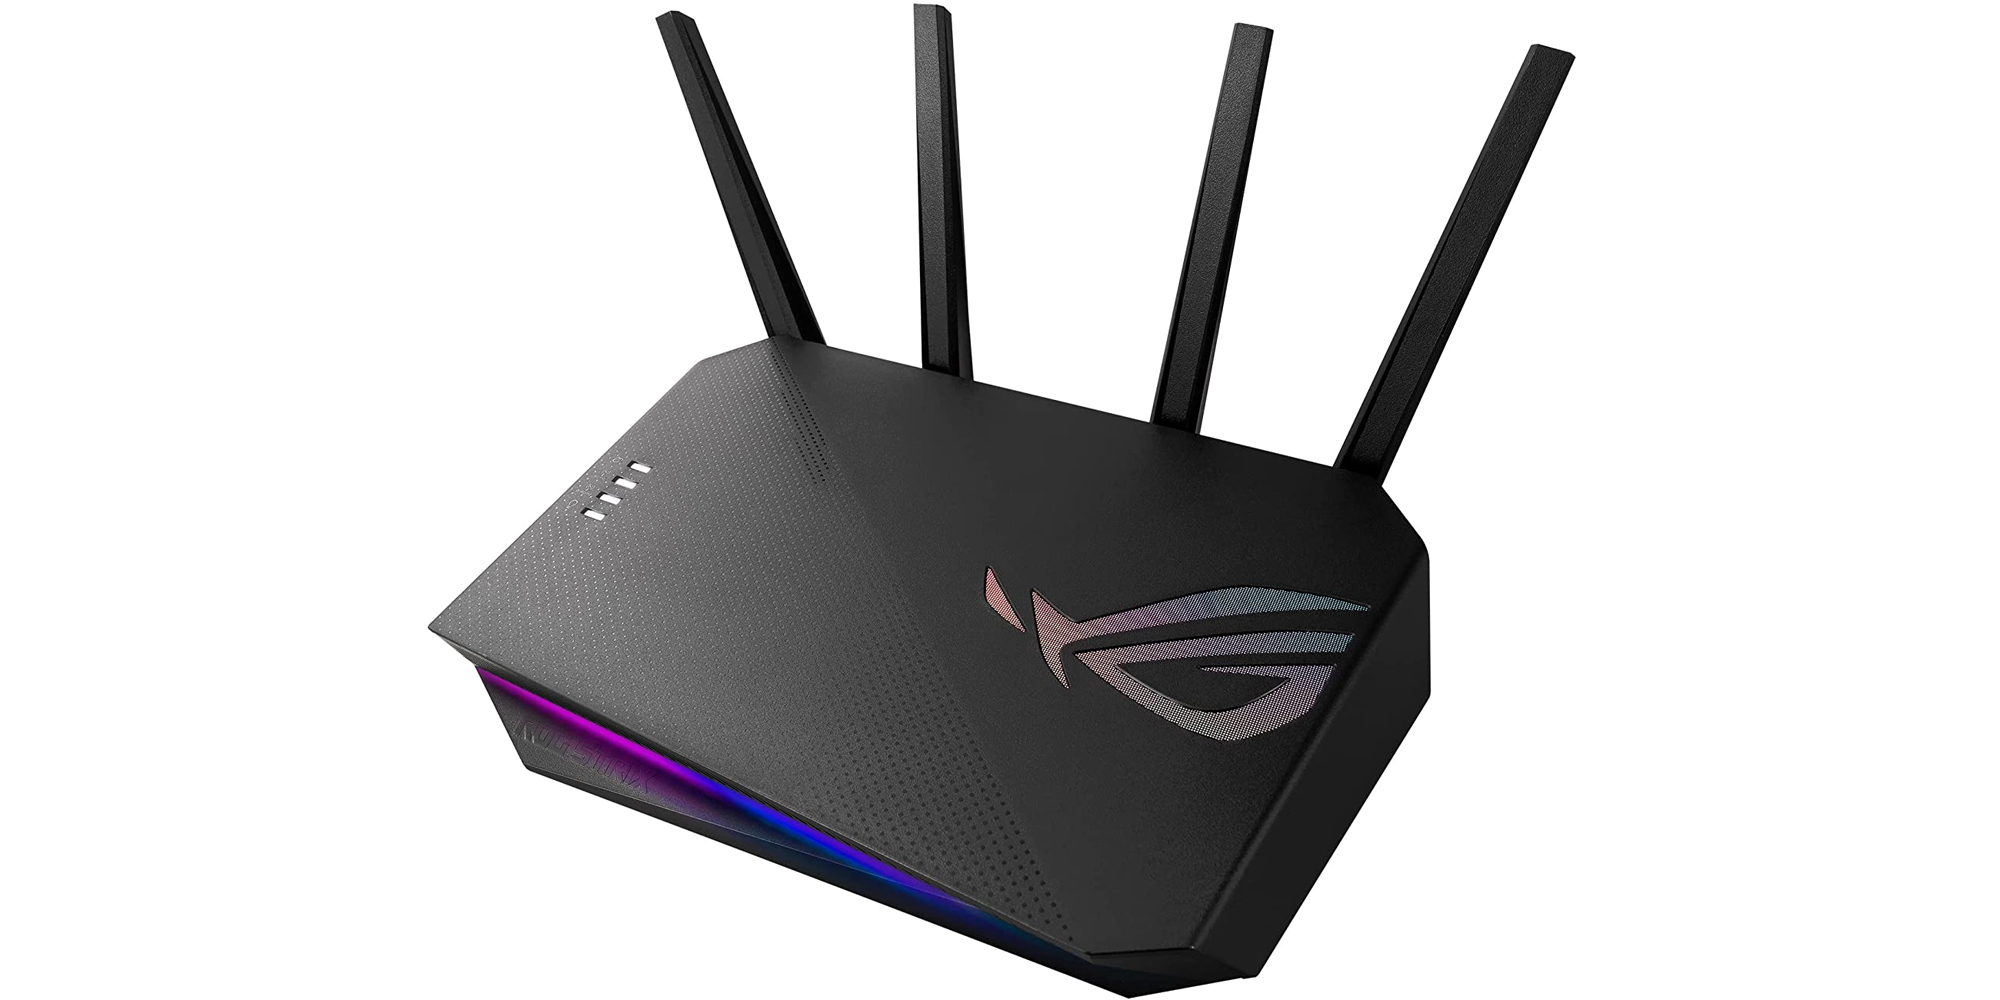 pension square ventilation Save $32 on ASUS' ROG Strix AX5400 Wi-Fi 6 Gaming Router at its second-best  price of $180